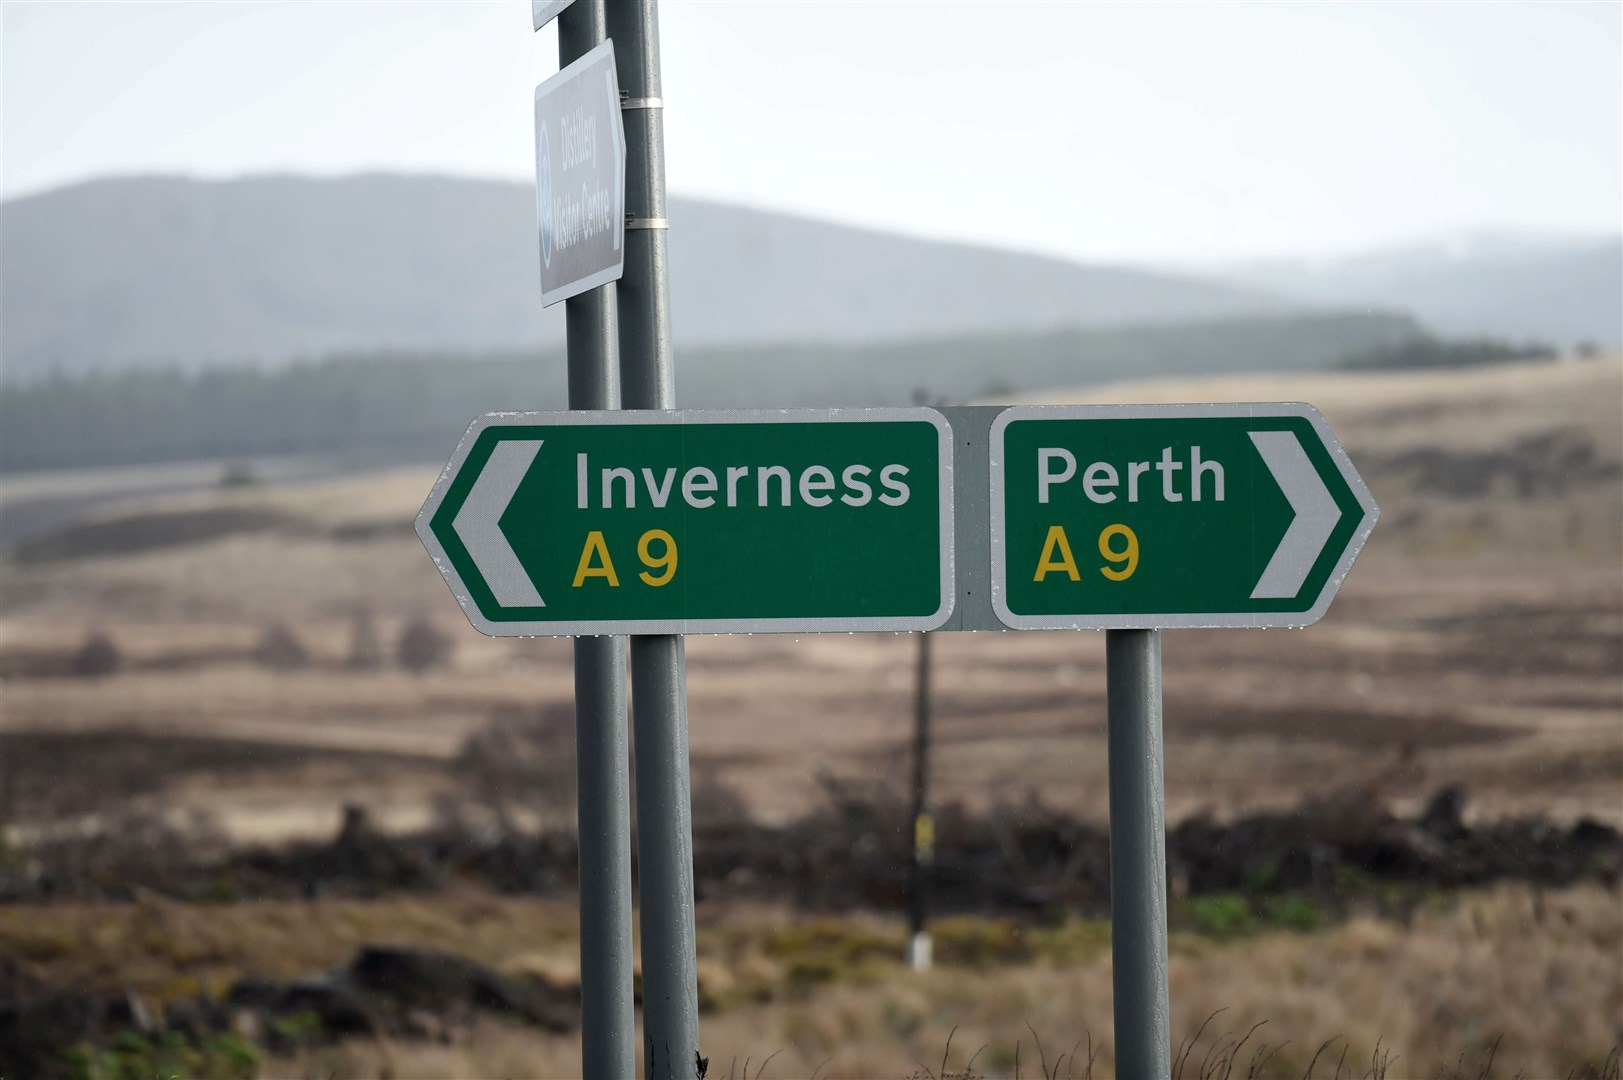 Driving is now said to be 'restricted' northbound on the A9 at Daviot.